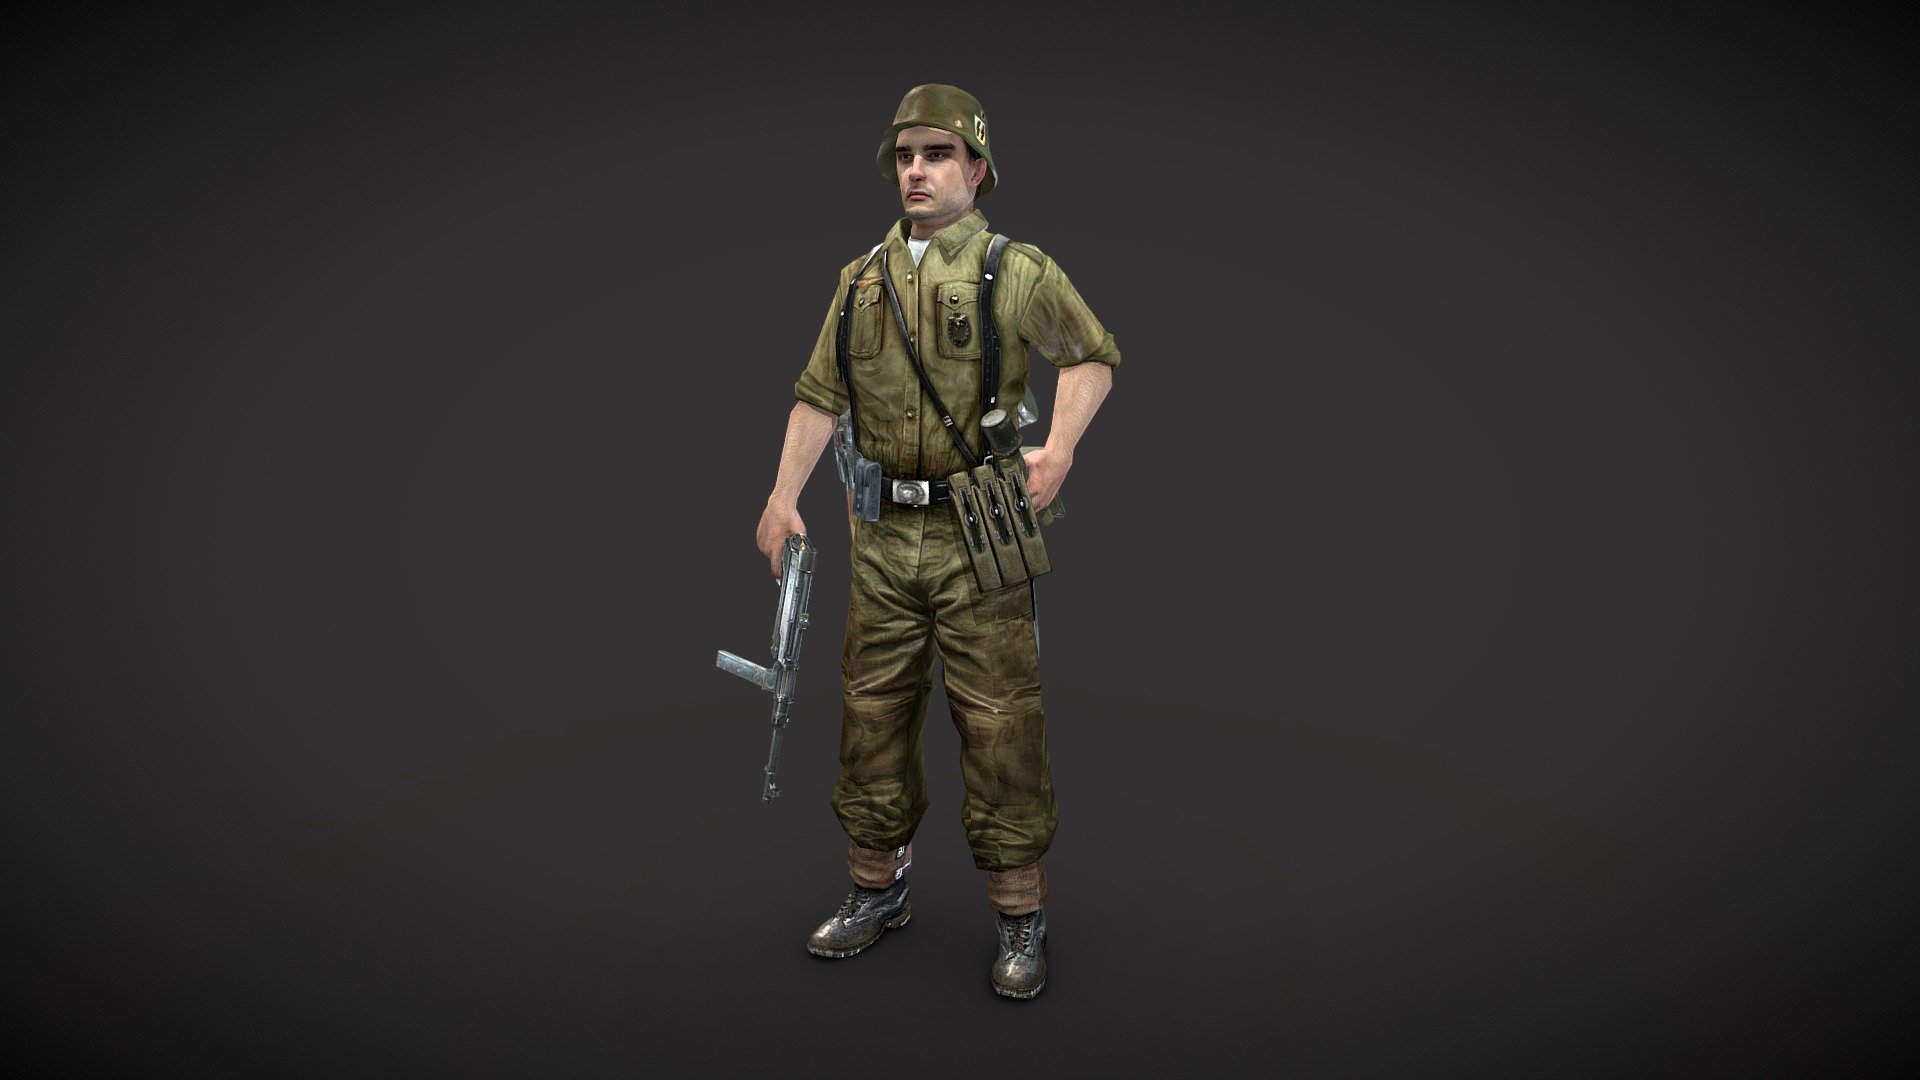 WWII German Soldier 3D character.
Rigged using 3ds Max biped and phisique modifier.
Additional attached file includes T-pose 3d model